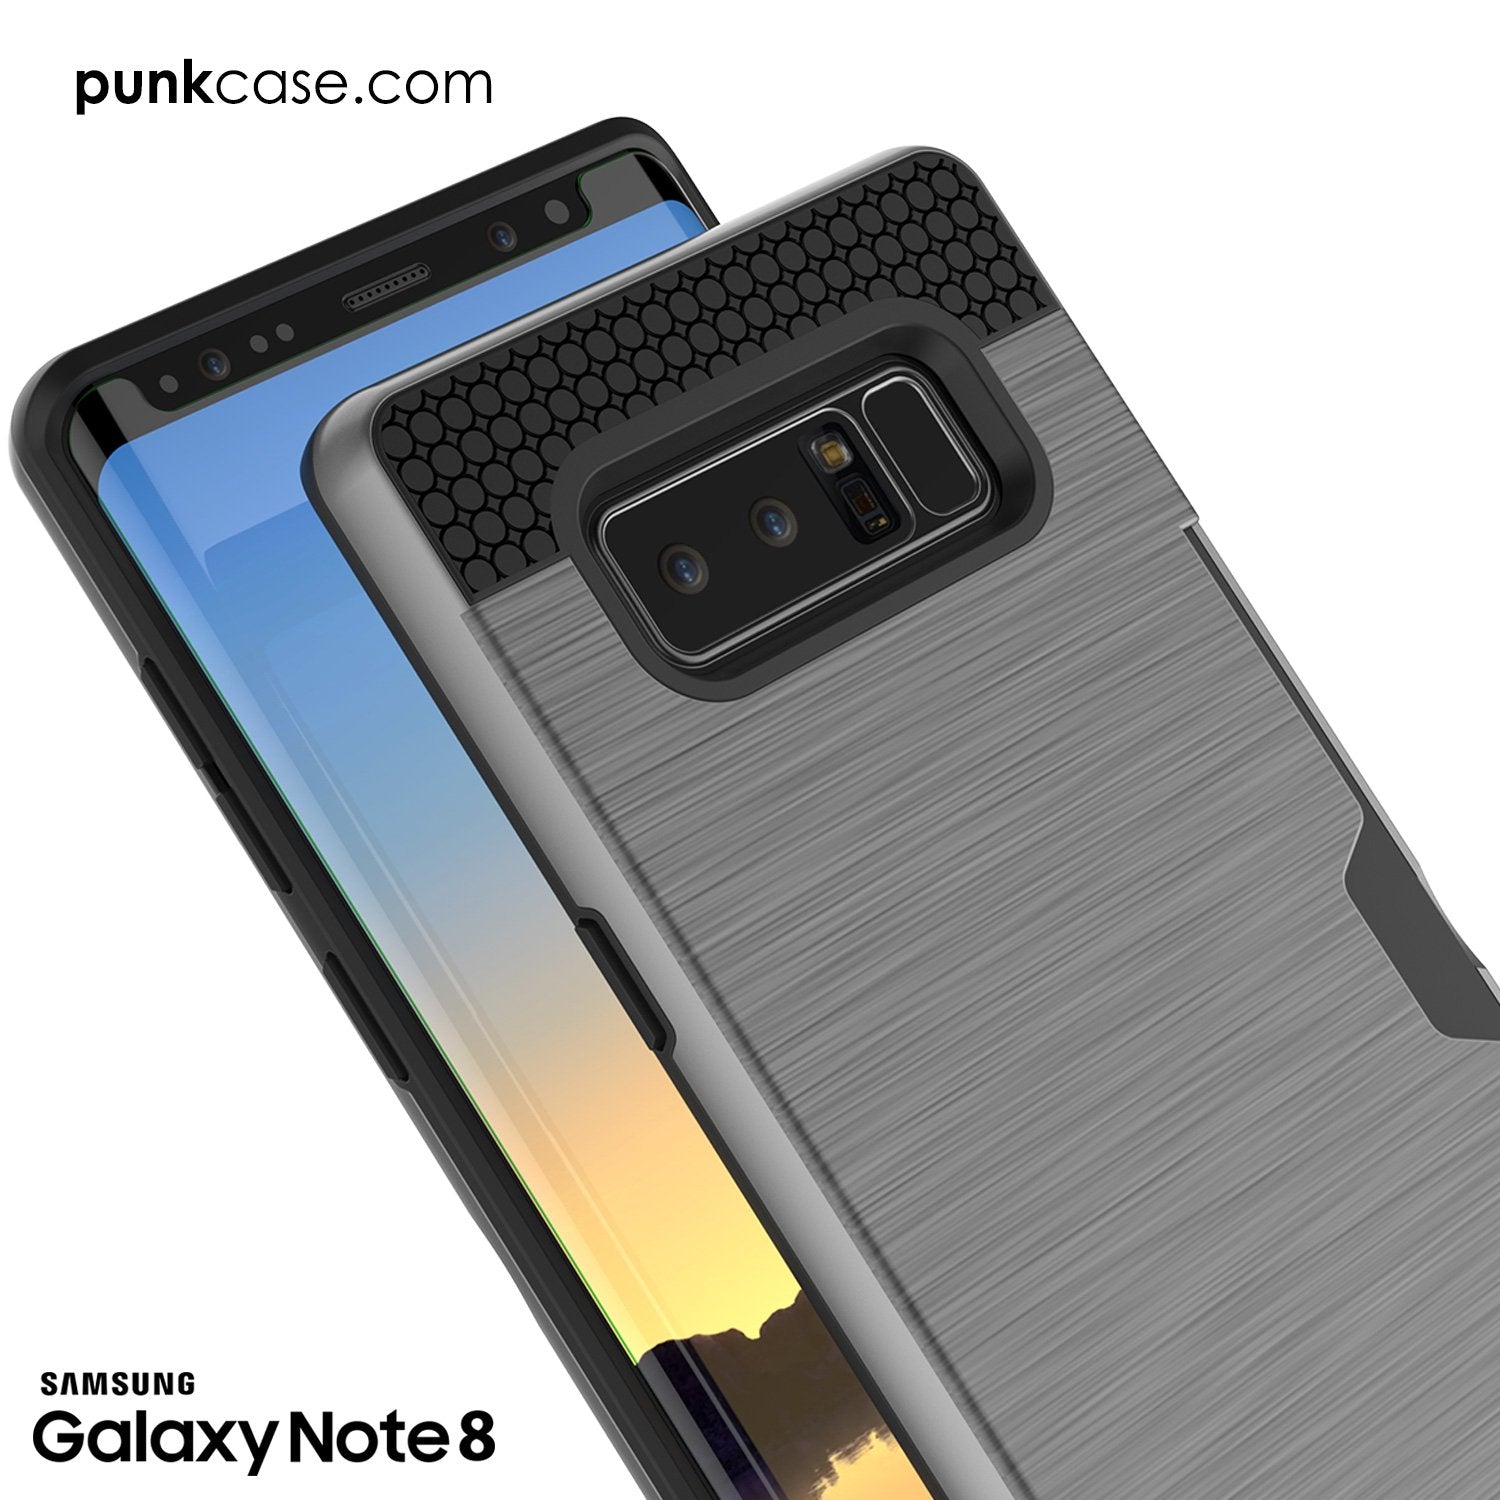 Galaxy Note 8 Case, PUNKcase [SLOT Series] [Slim Fit] Dual-Layer Armor Cover w/Integrated Anti-Shock System, Credit Card Slot [Grey]